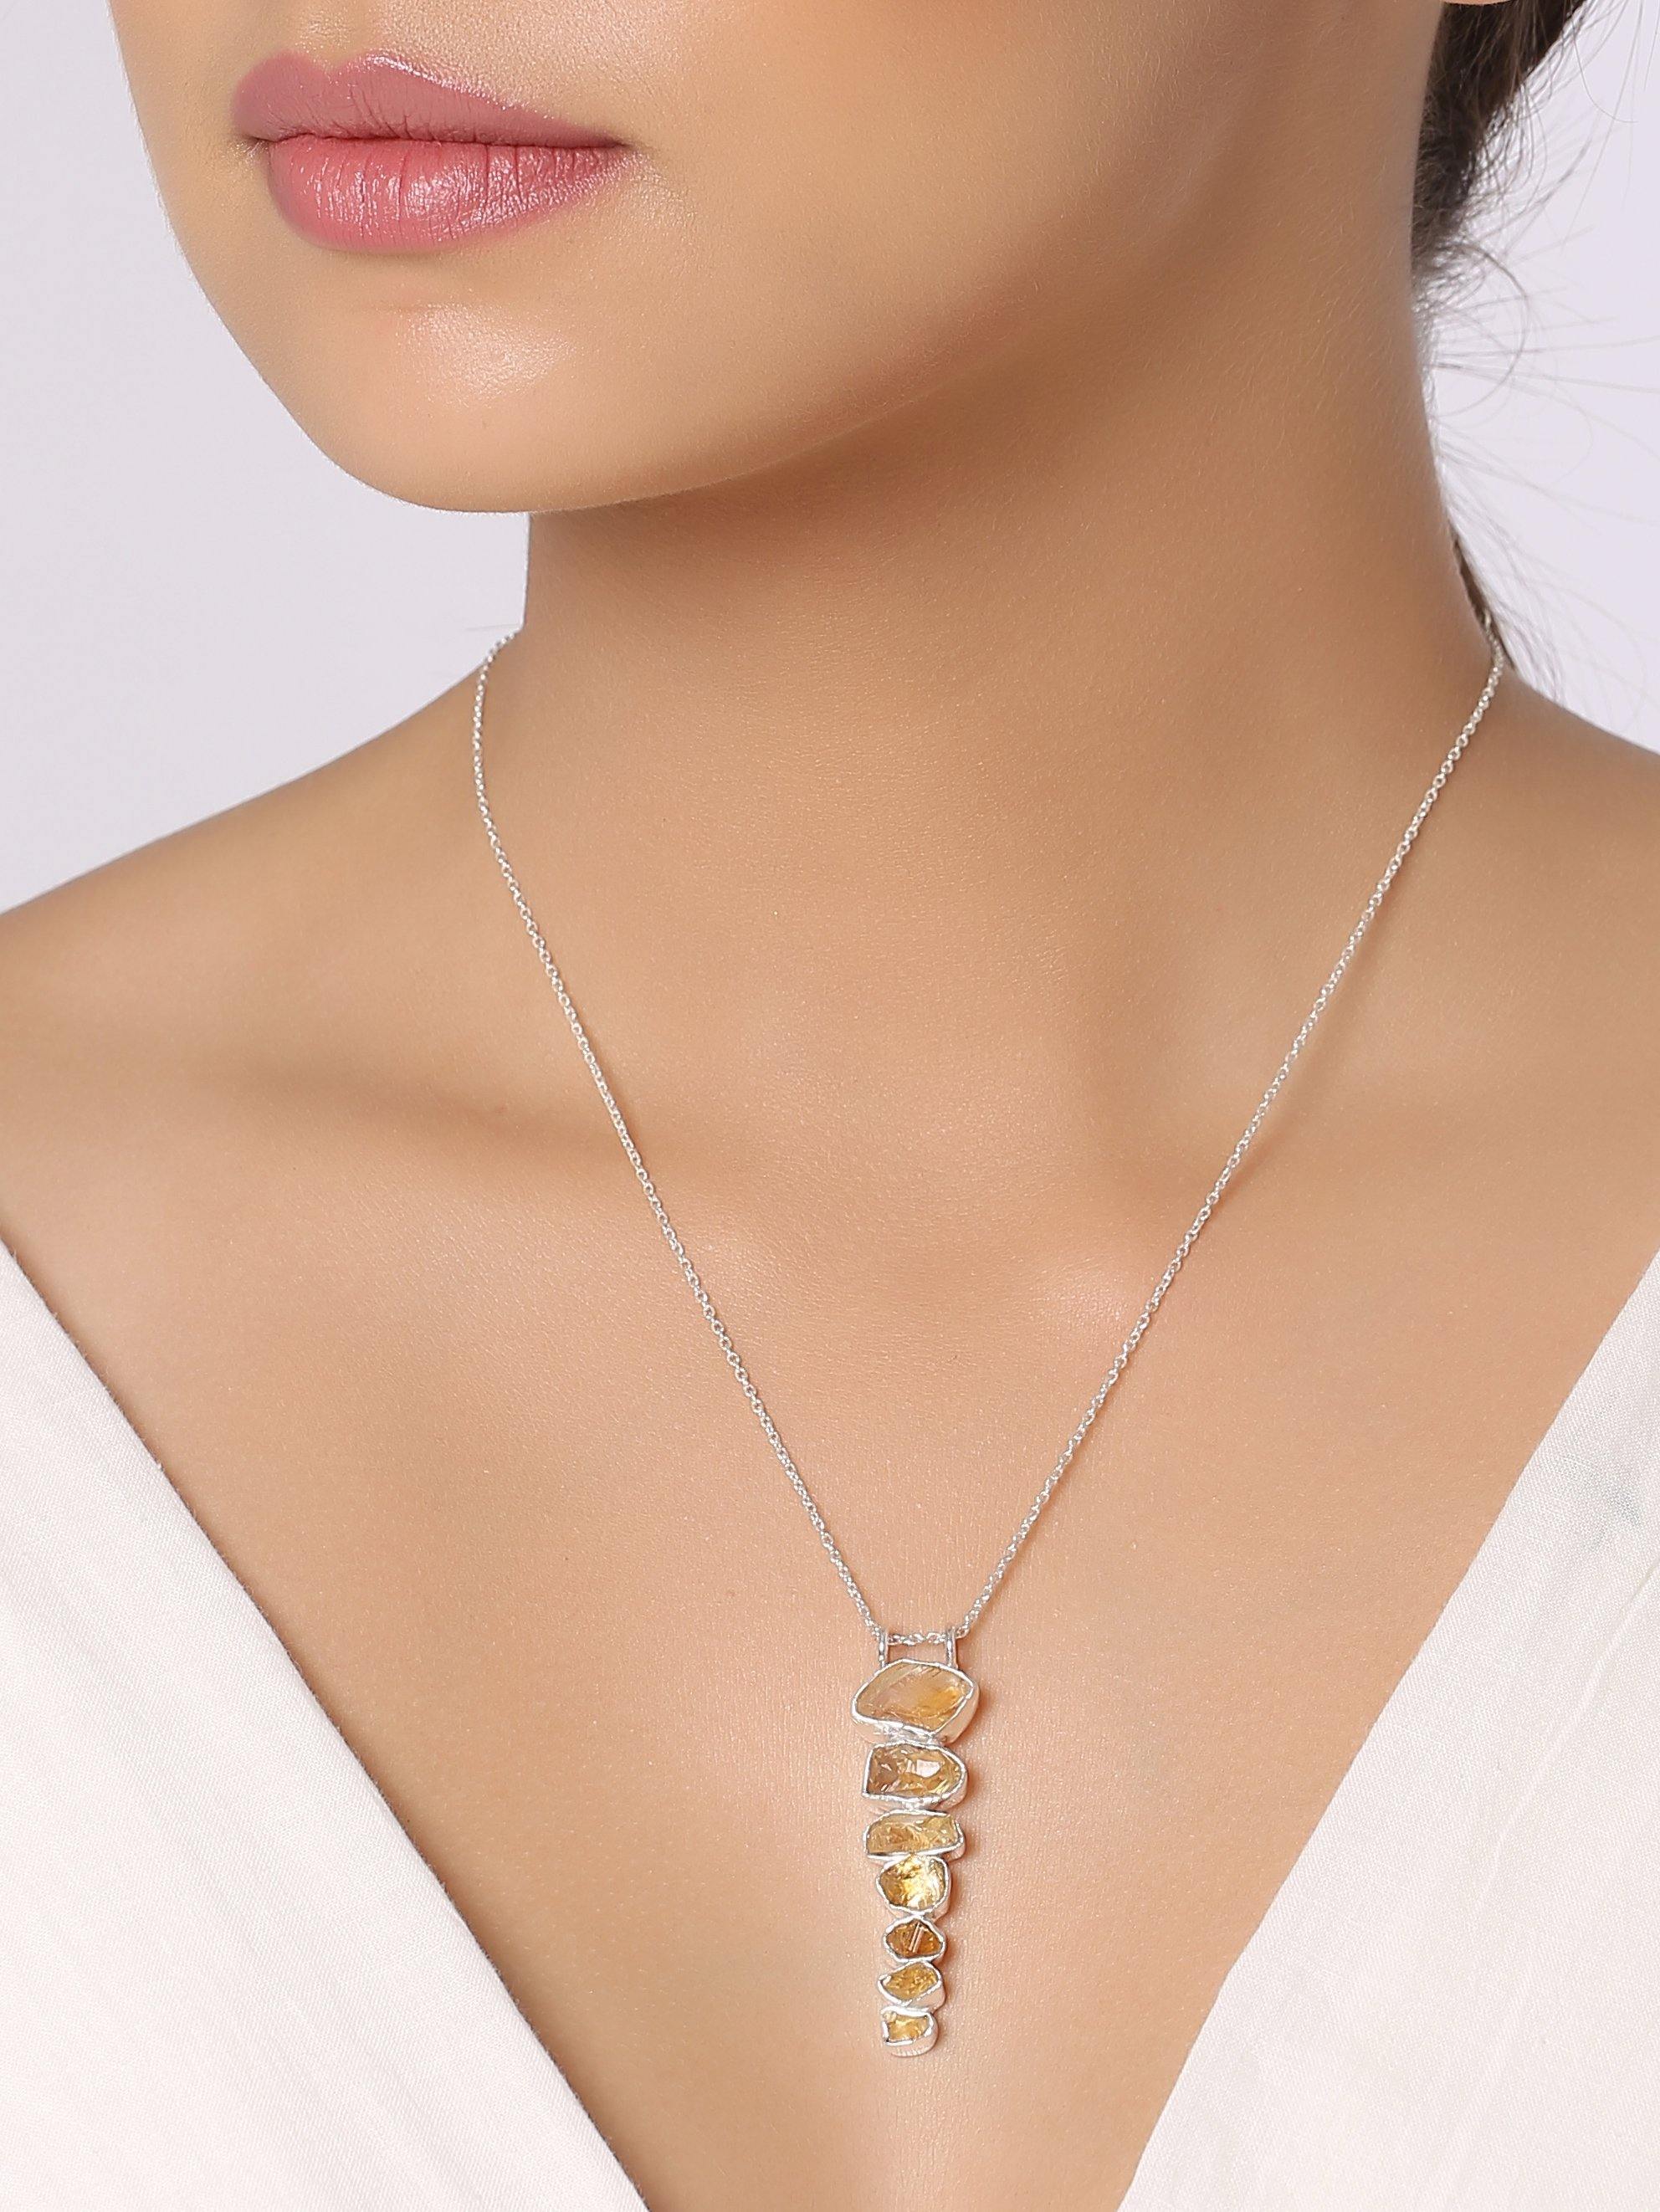 Rough Citrine Solid 925 Sterling Silver Pendant with 18 Inch Chain Necklace Jewelry - YoTreasure